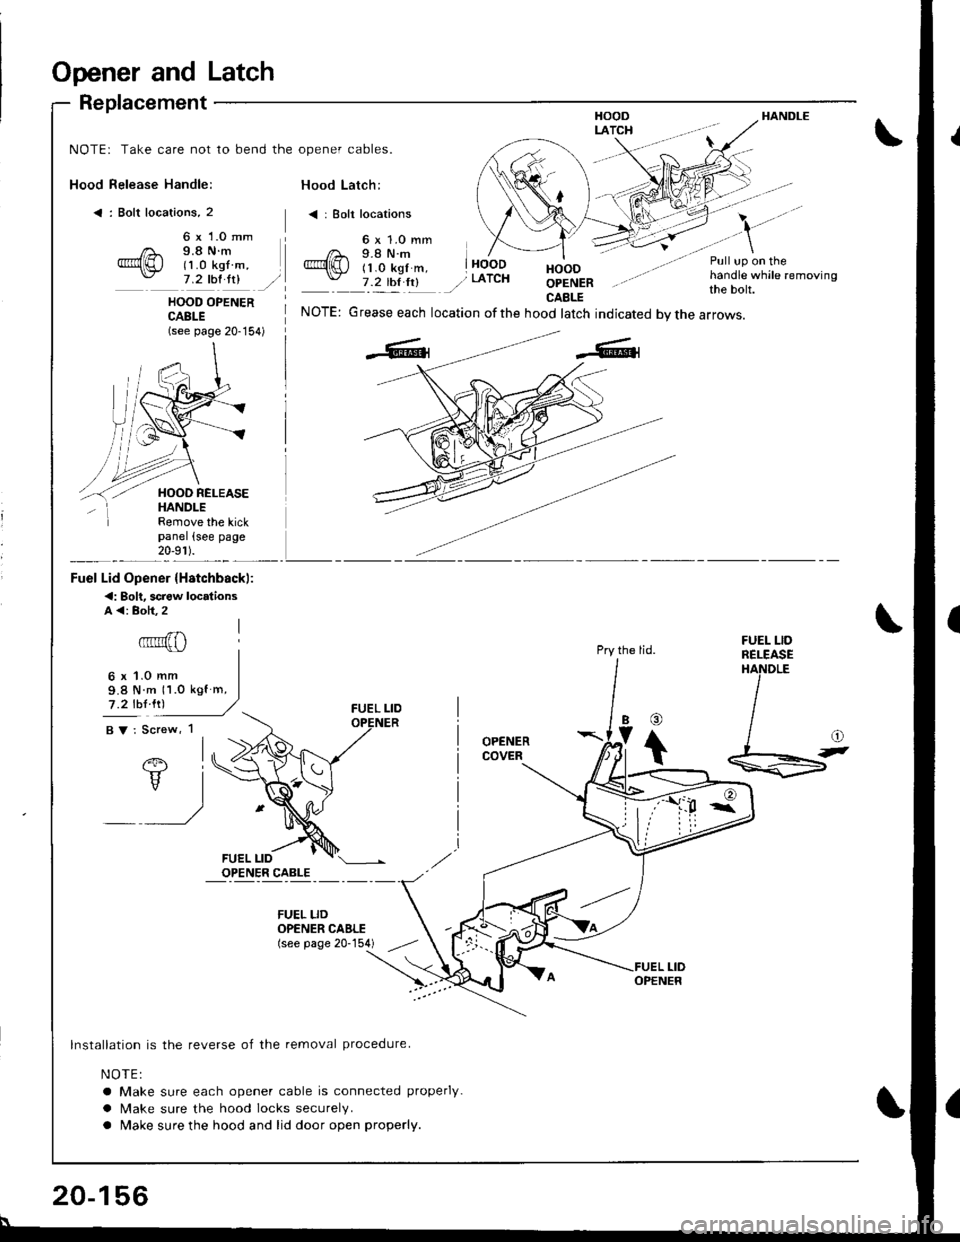 HONDA INTEGRA 1998 4.G Workshop Manual Opener and Latch
Replacement
Hood Release Handle:
< : Bolt locations, 2
HANDLE
NOTE: Take care not to bend the opener cables.
Hood Latch:
< | Bolt locations
6 x 1.0 mm9.8 N.m(1 .0 kgf m,7 .2 thl ltlHO